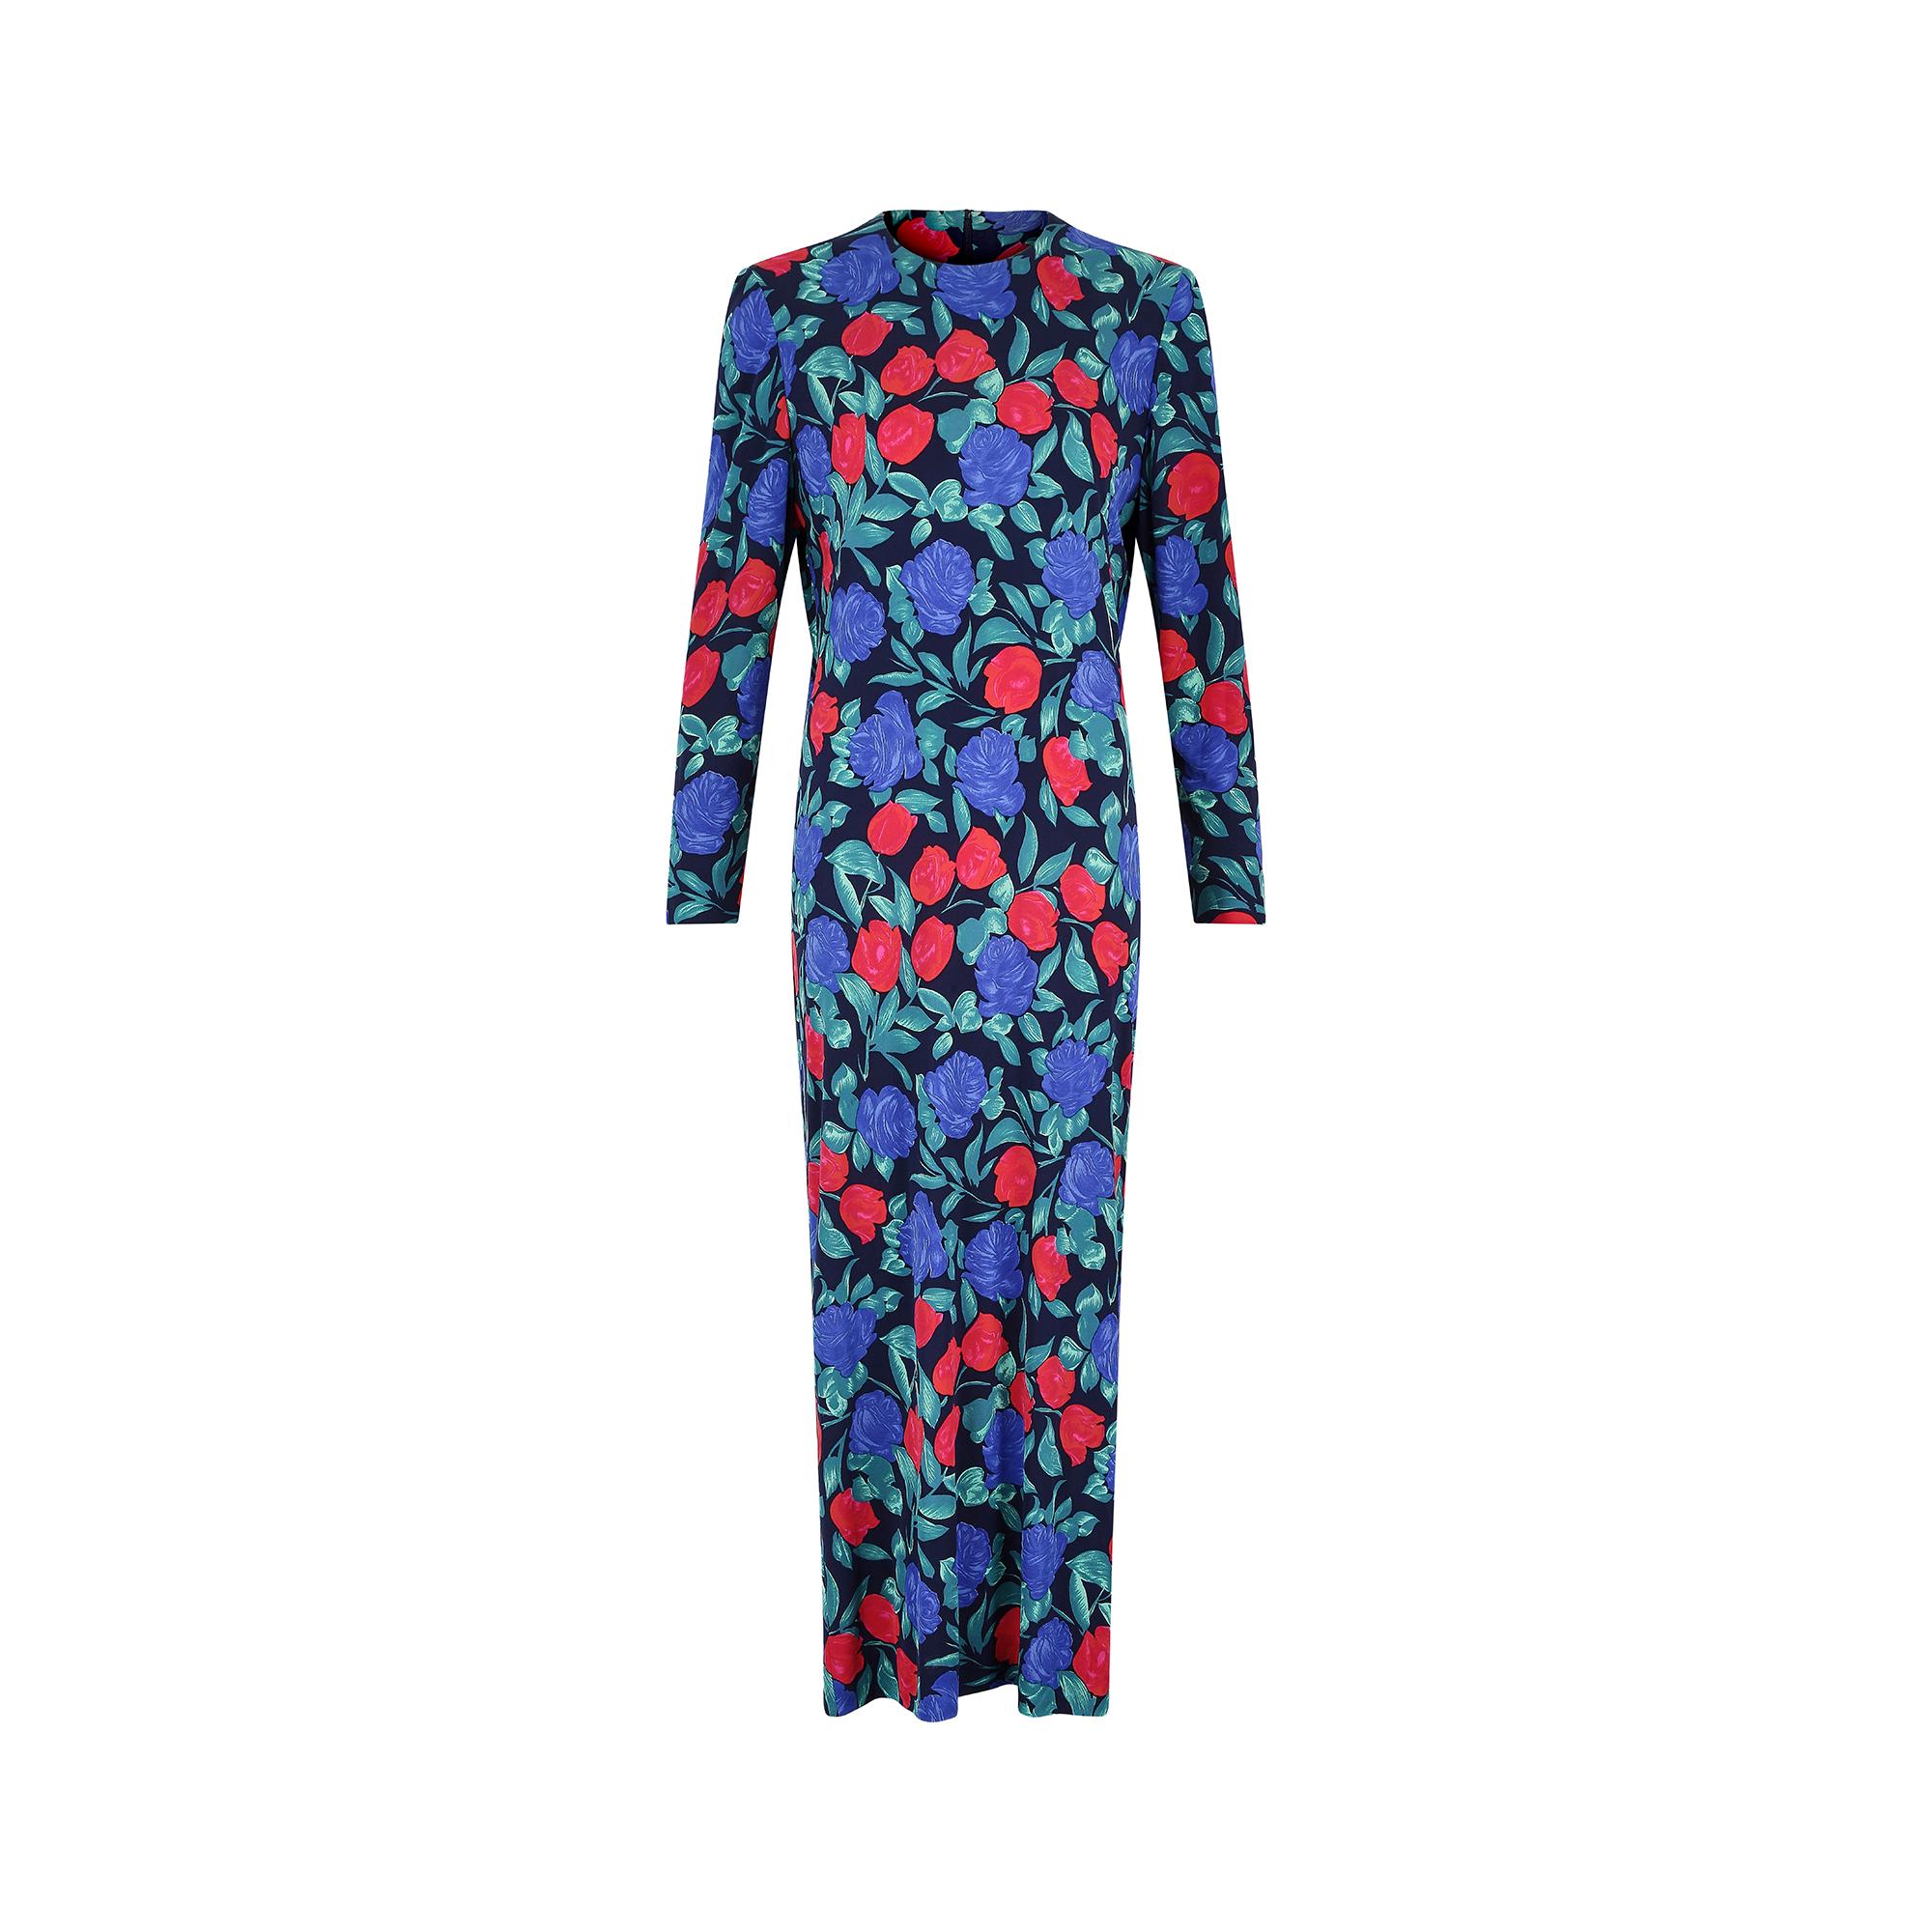 This late 1970s to early 1980s French couture silk jersey maxi dress has a beautiful blue and red rose print design against a darker blue background. It has a high, round neckline and is cut in a simple, shift-like shape to the ankles. It has long